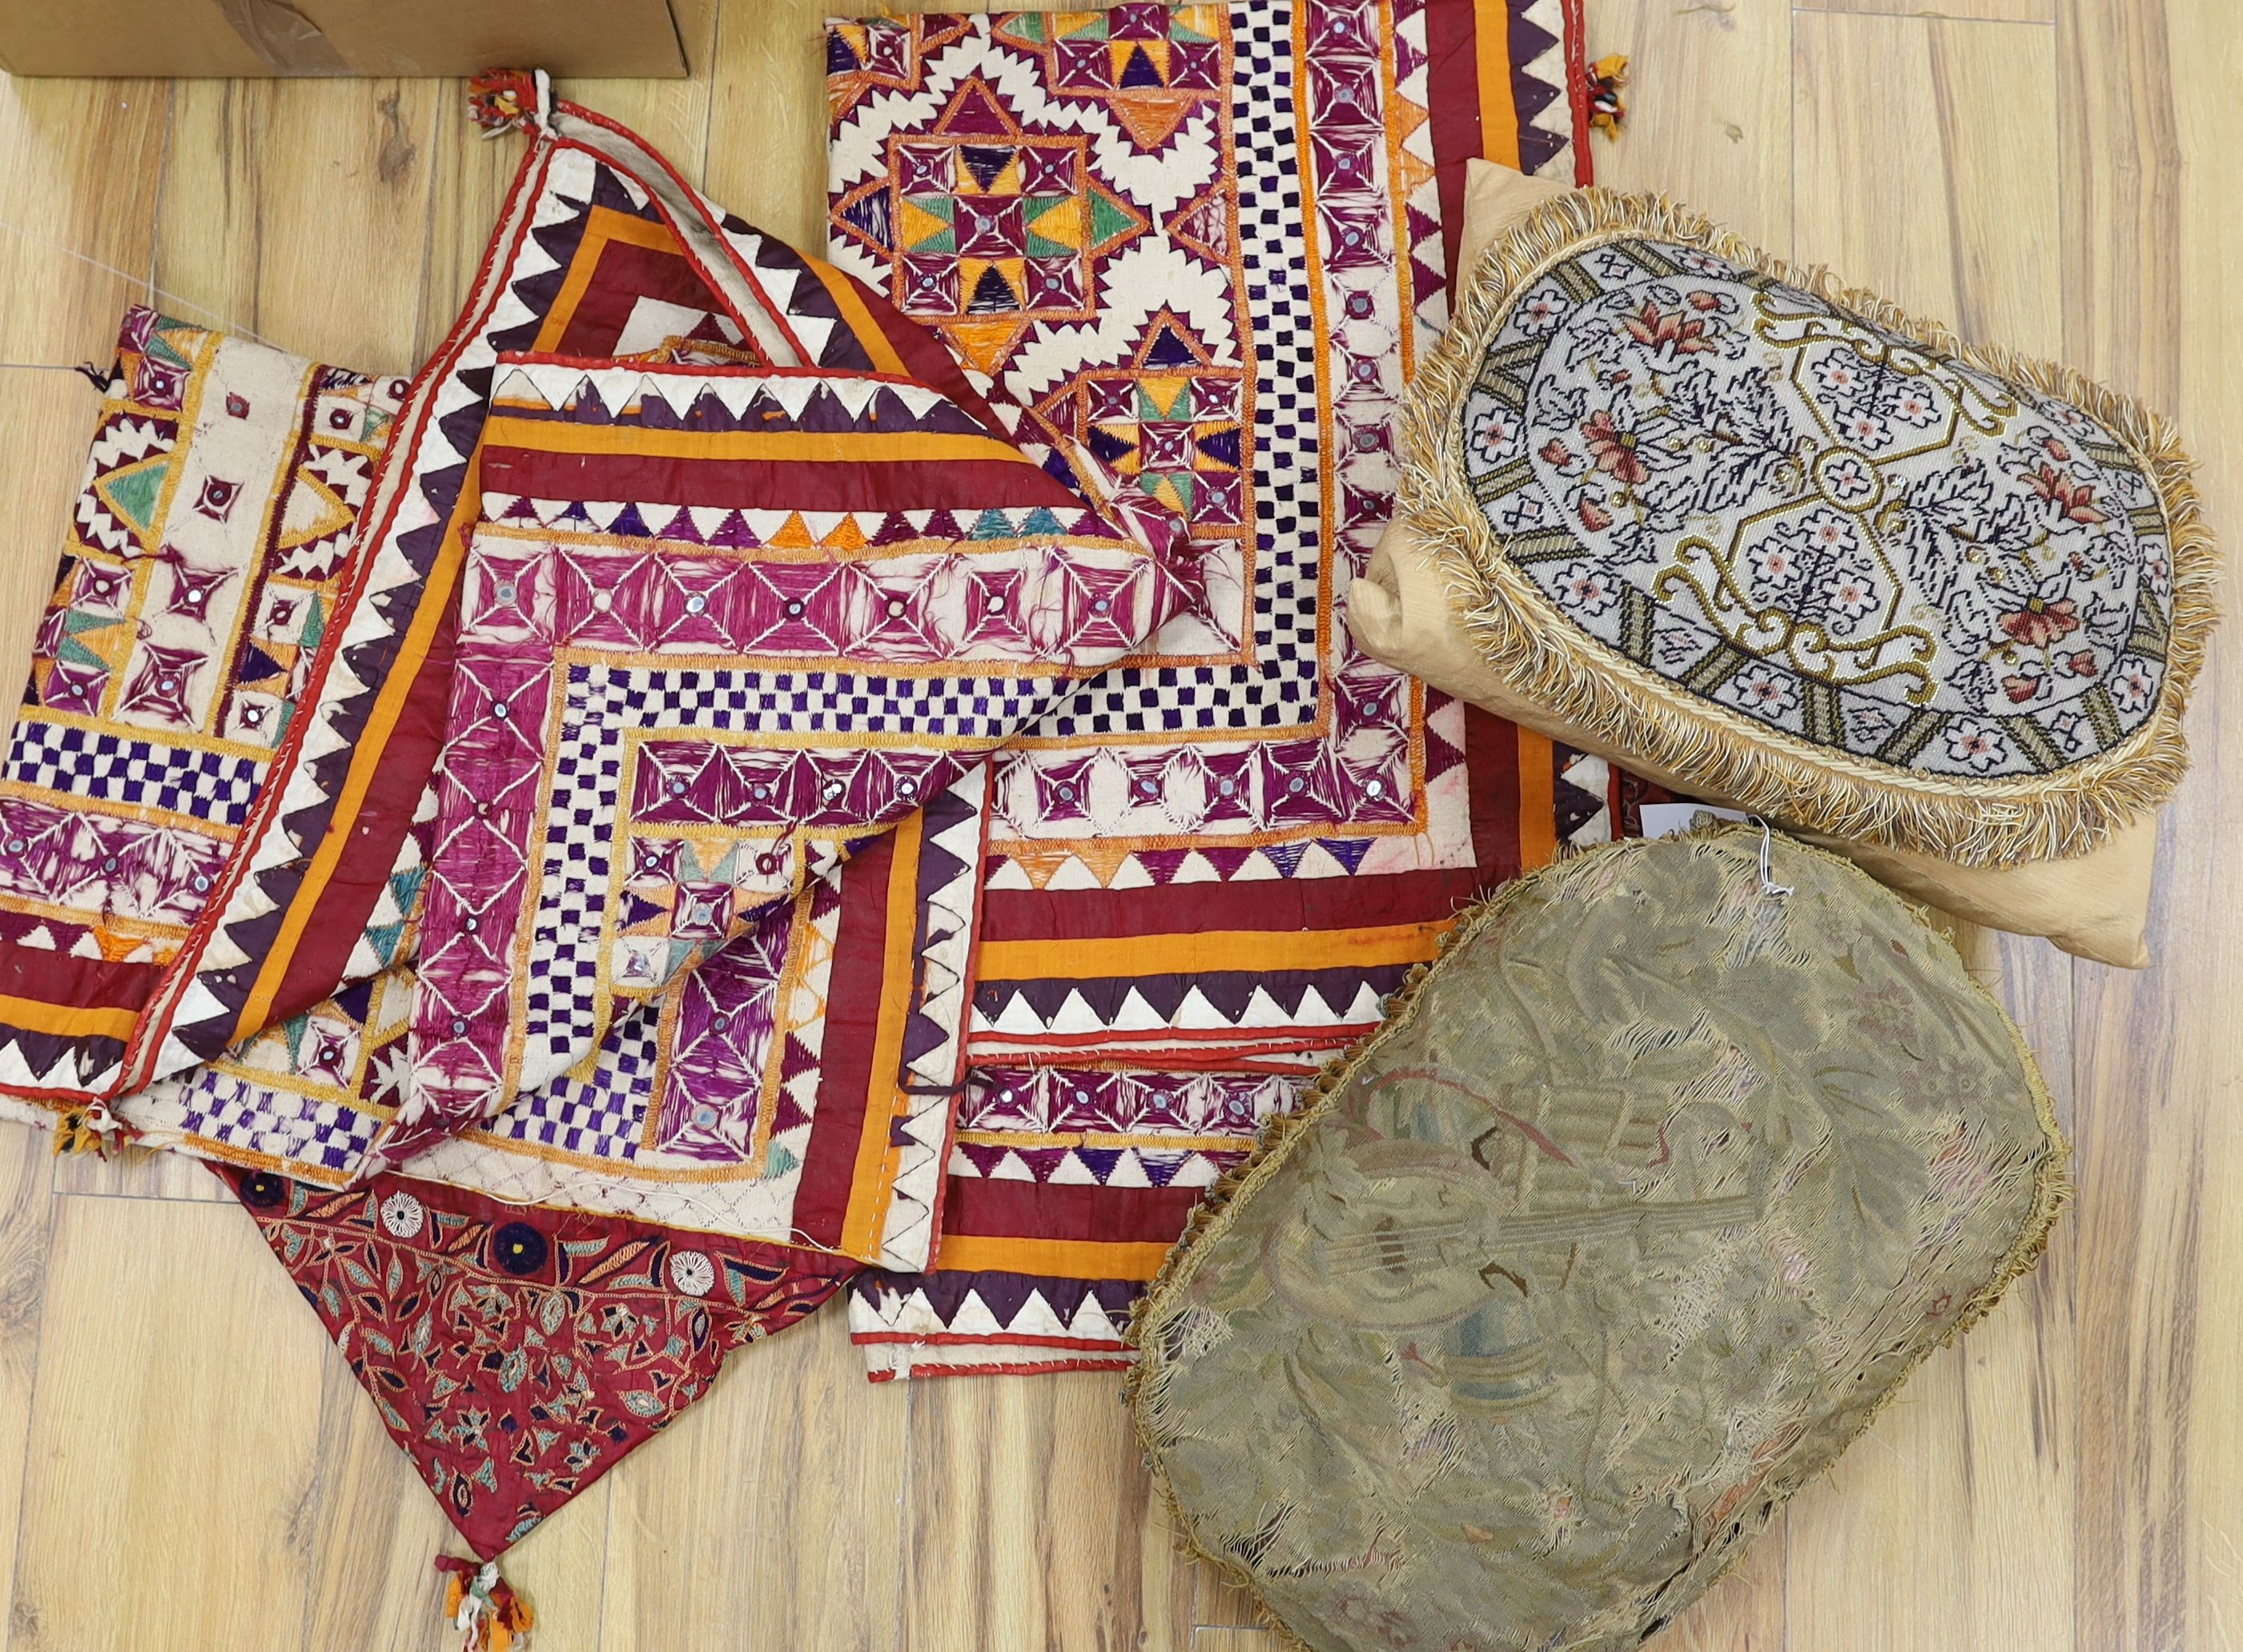 An Indian embroidered cover and cushions